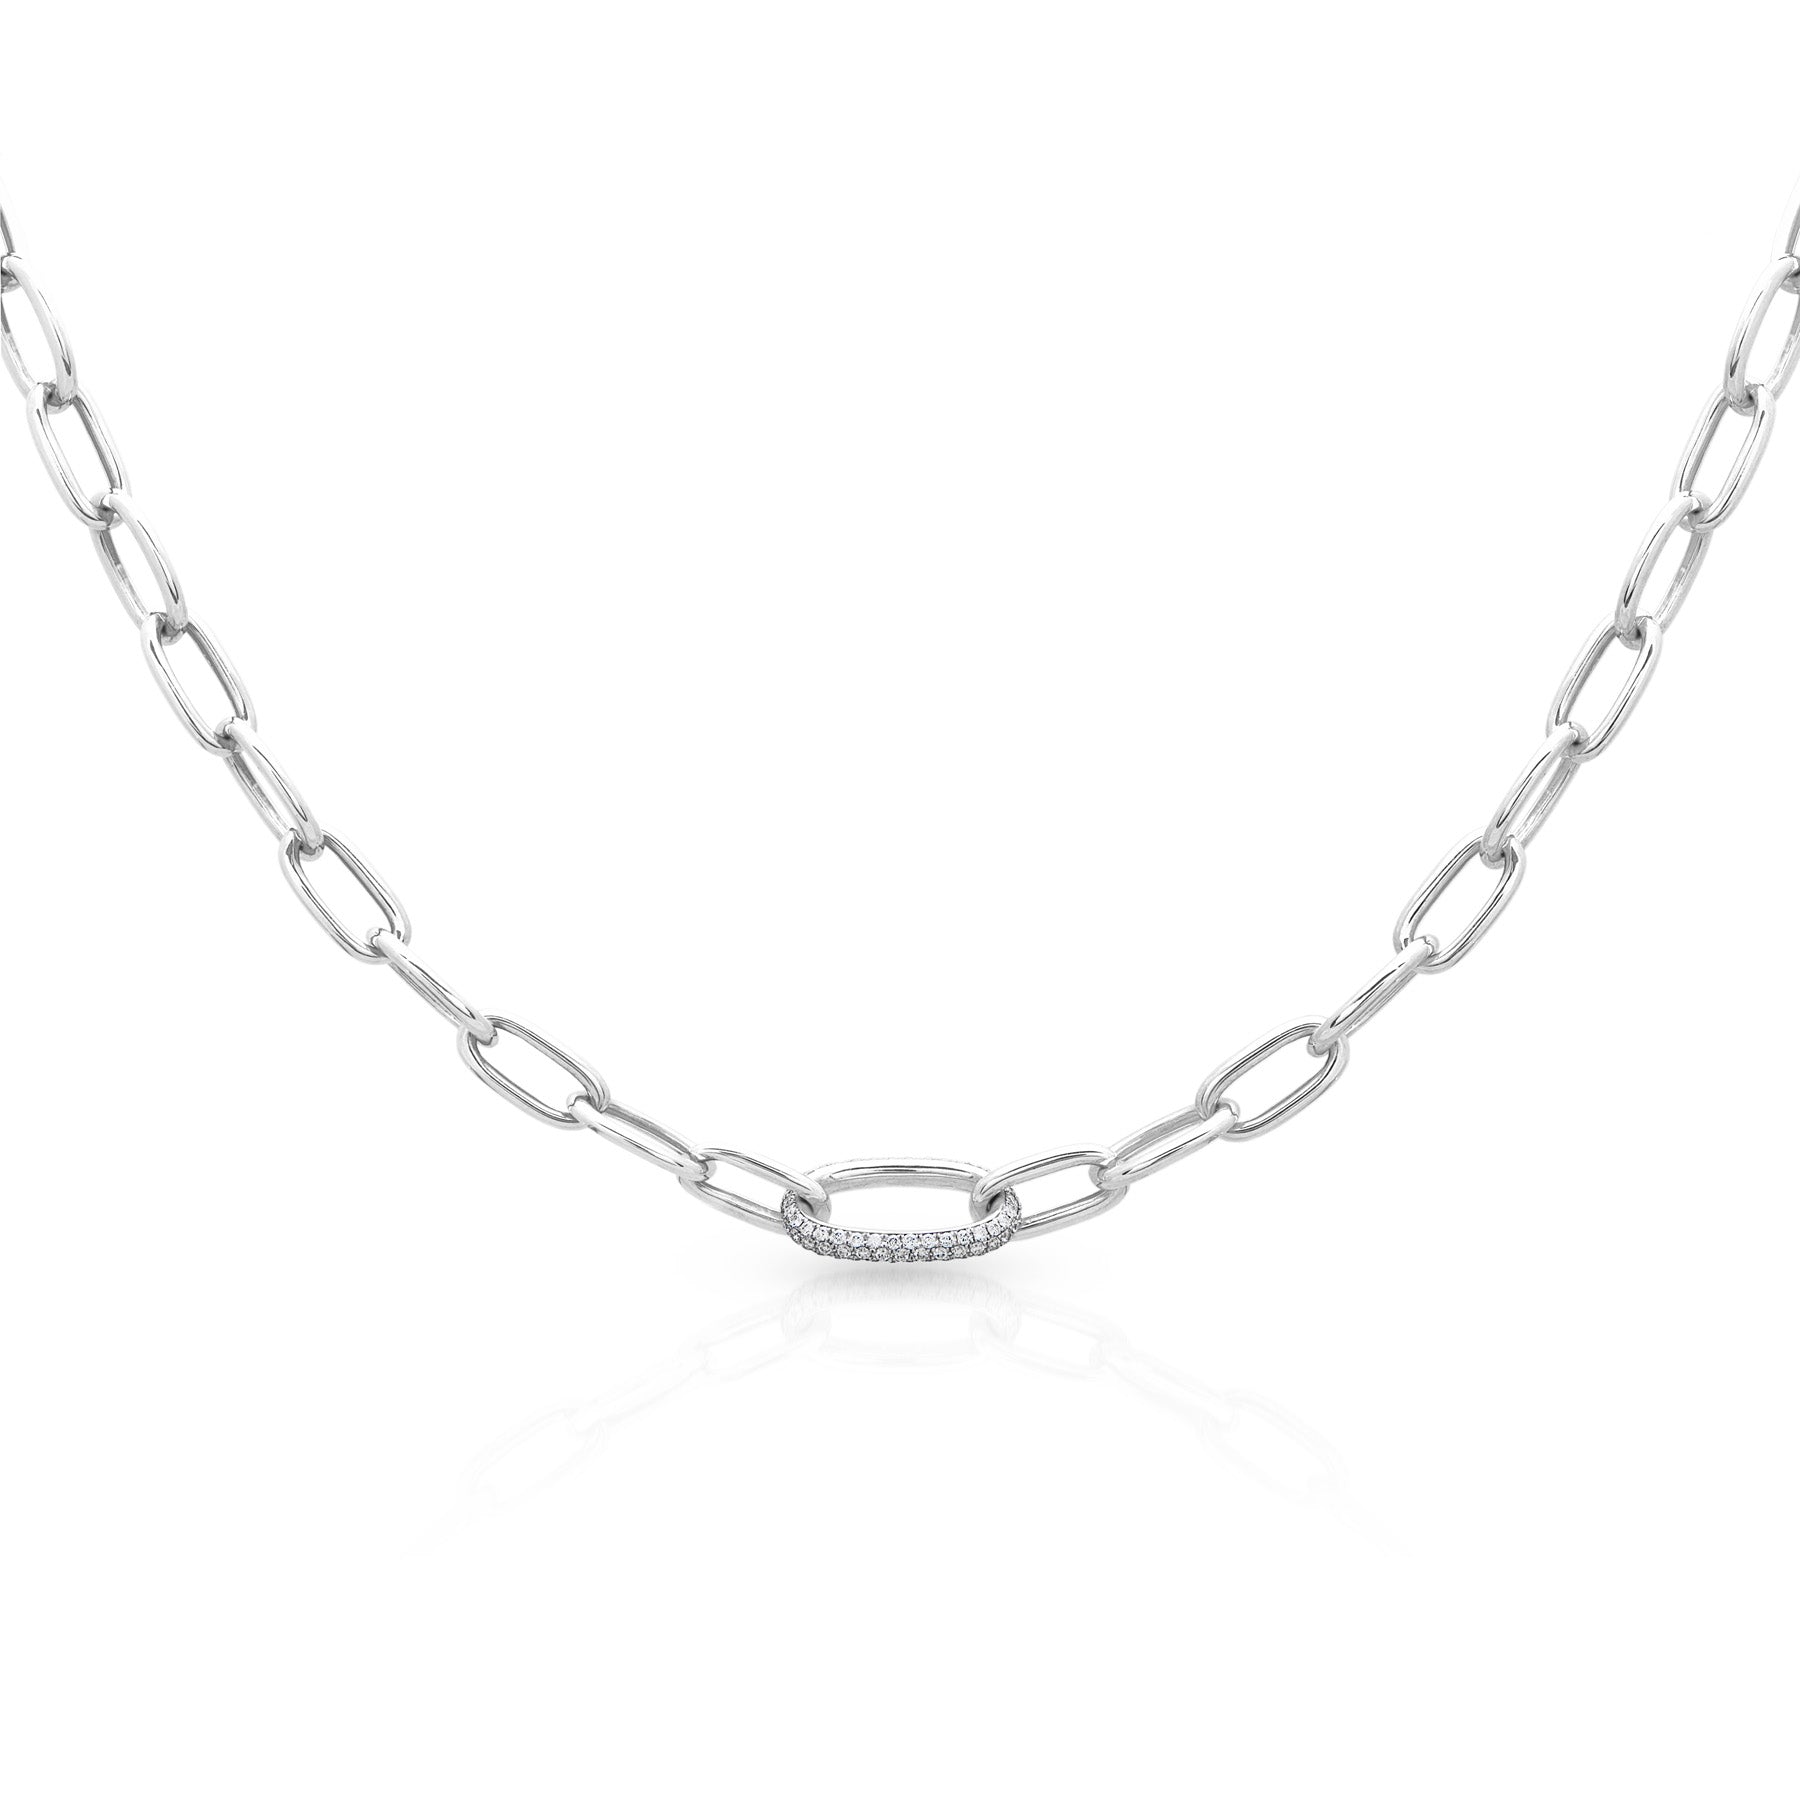 14KT White Gold Diamond Luxe Janesse Chain Link Necklace